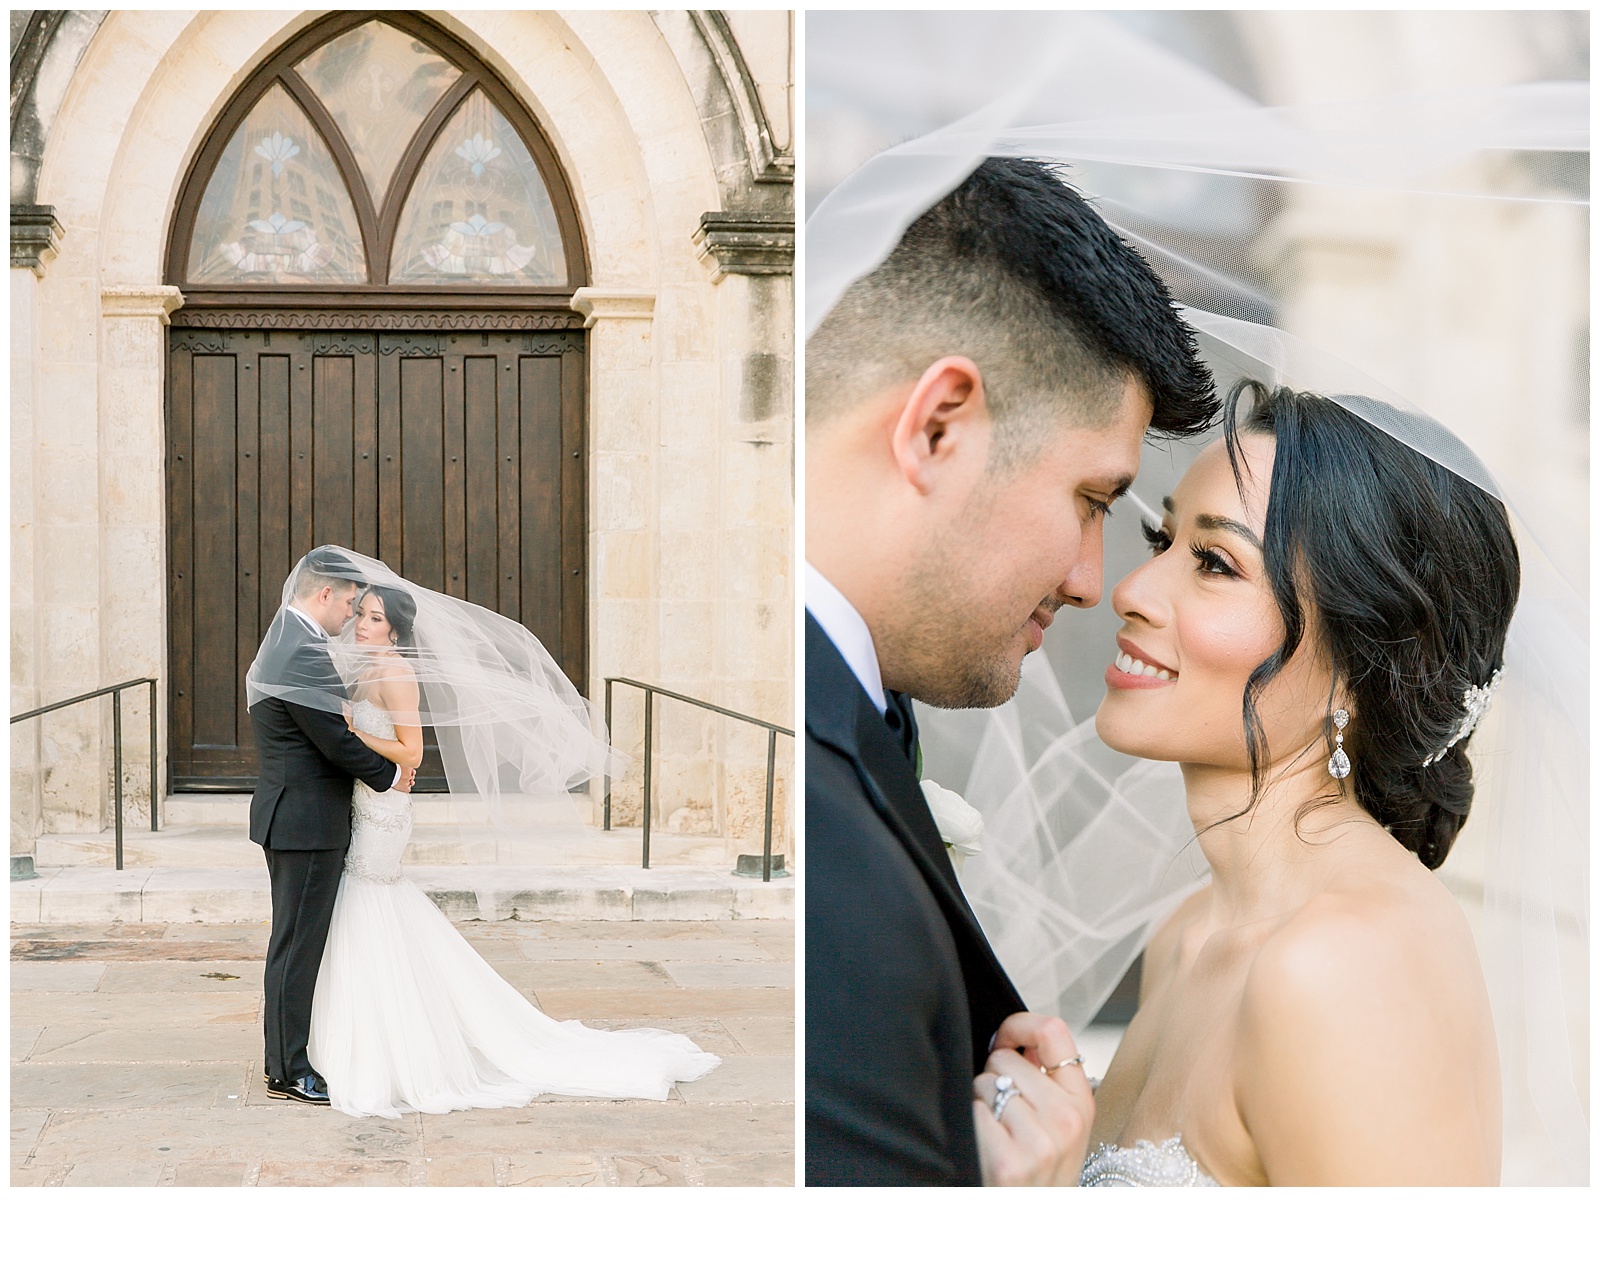 Bride and groom portraits with veil for A San Fernando Cathedral Wedding in San Antonio, TX | Monica Roberts Photography | www.monicaroberts.com | San Antonio Wedding Photographer